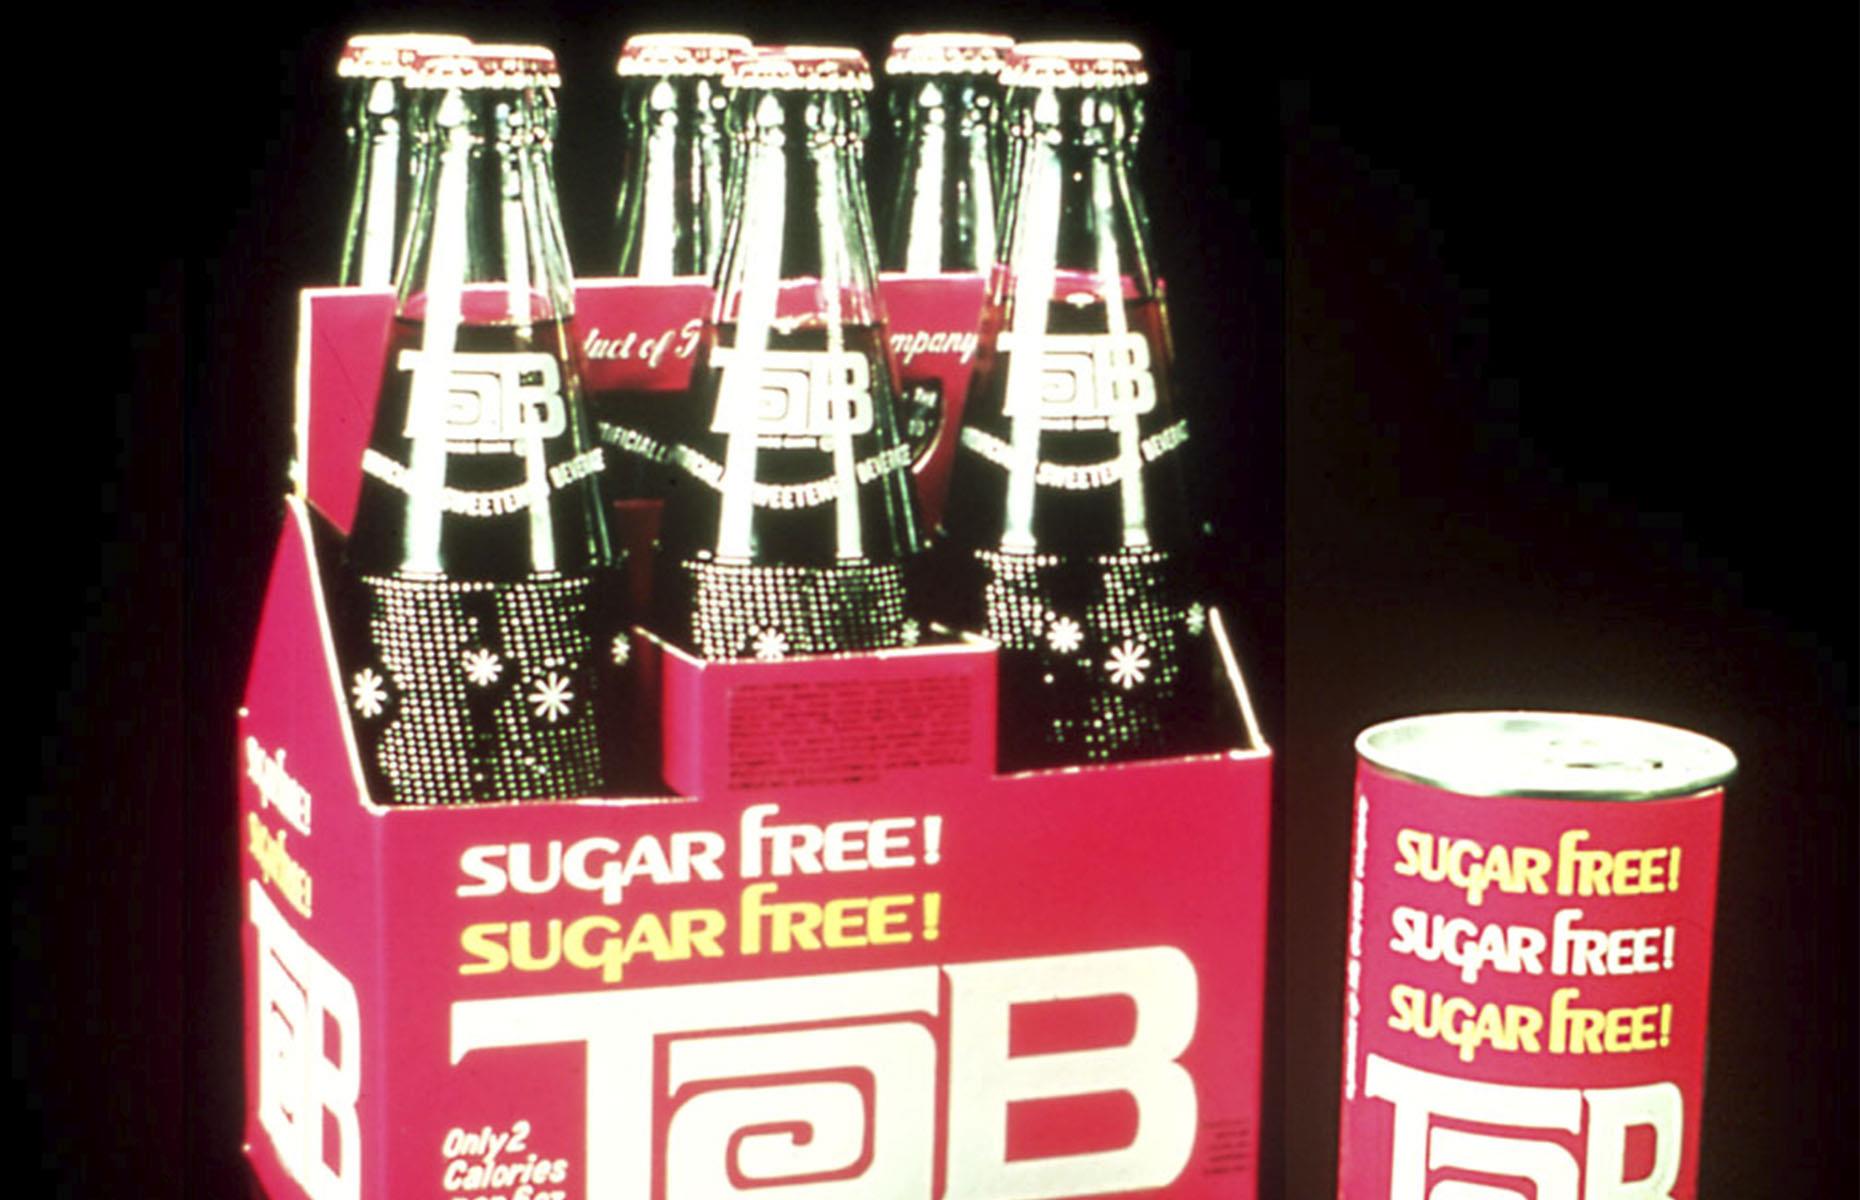 Tab (pictured) – with its shiny pink cans and adverts with a bikini-clad Elle Macpherson – came out in 1963 and was Coca-Cola’s first diet soda. While Diet Coke was brought out in 1982 and has gone on to be wildly successful, Tab still has a cult following, even though it's harder to find in stores. Apparently, Tab's taste is more enjoyable because it isn’t trying to mimic sugar.